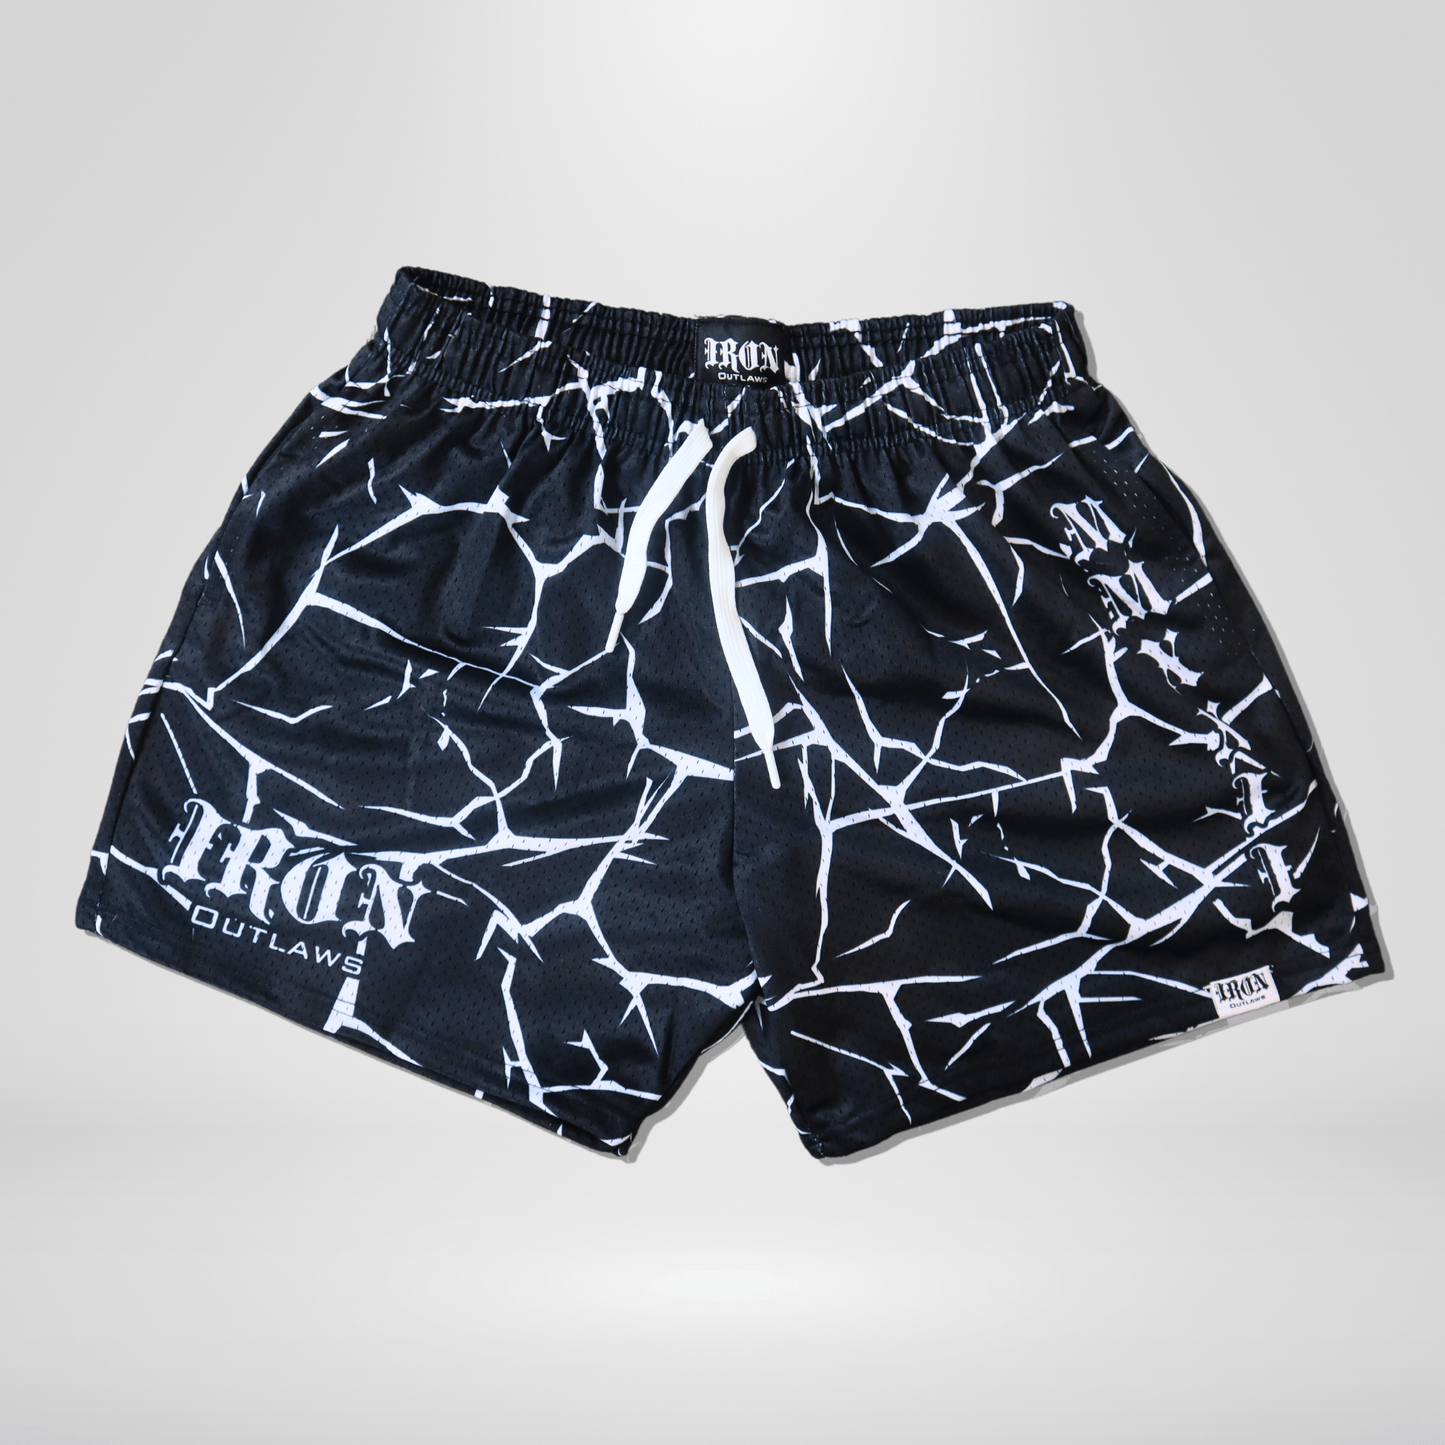 Iron Outlaws Heavyweight Black Ice Shorts